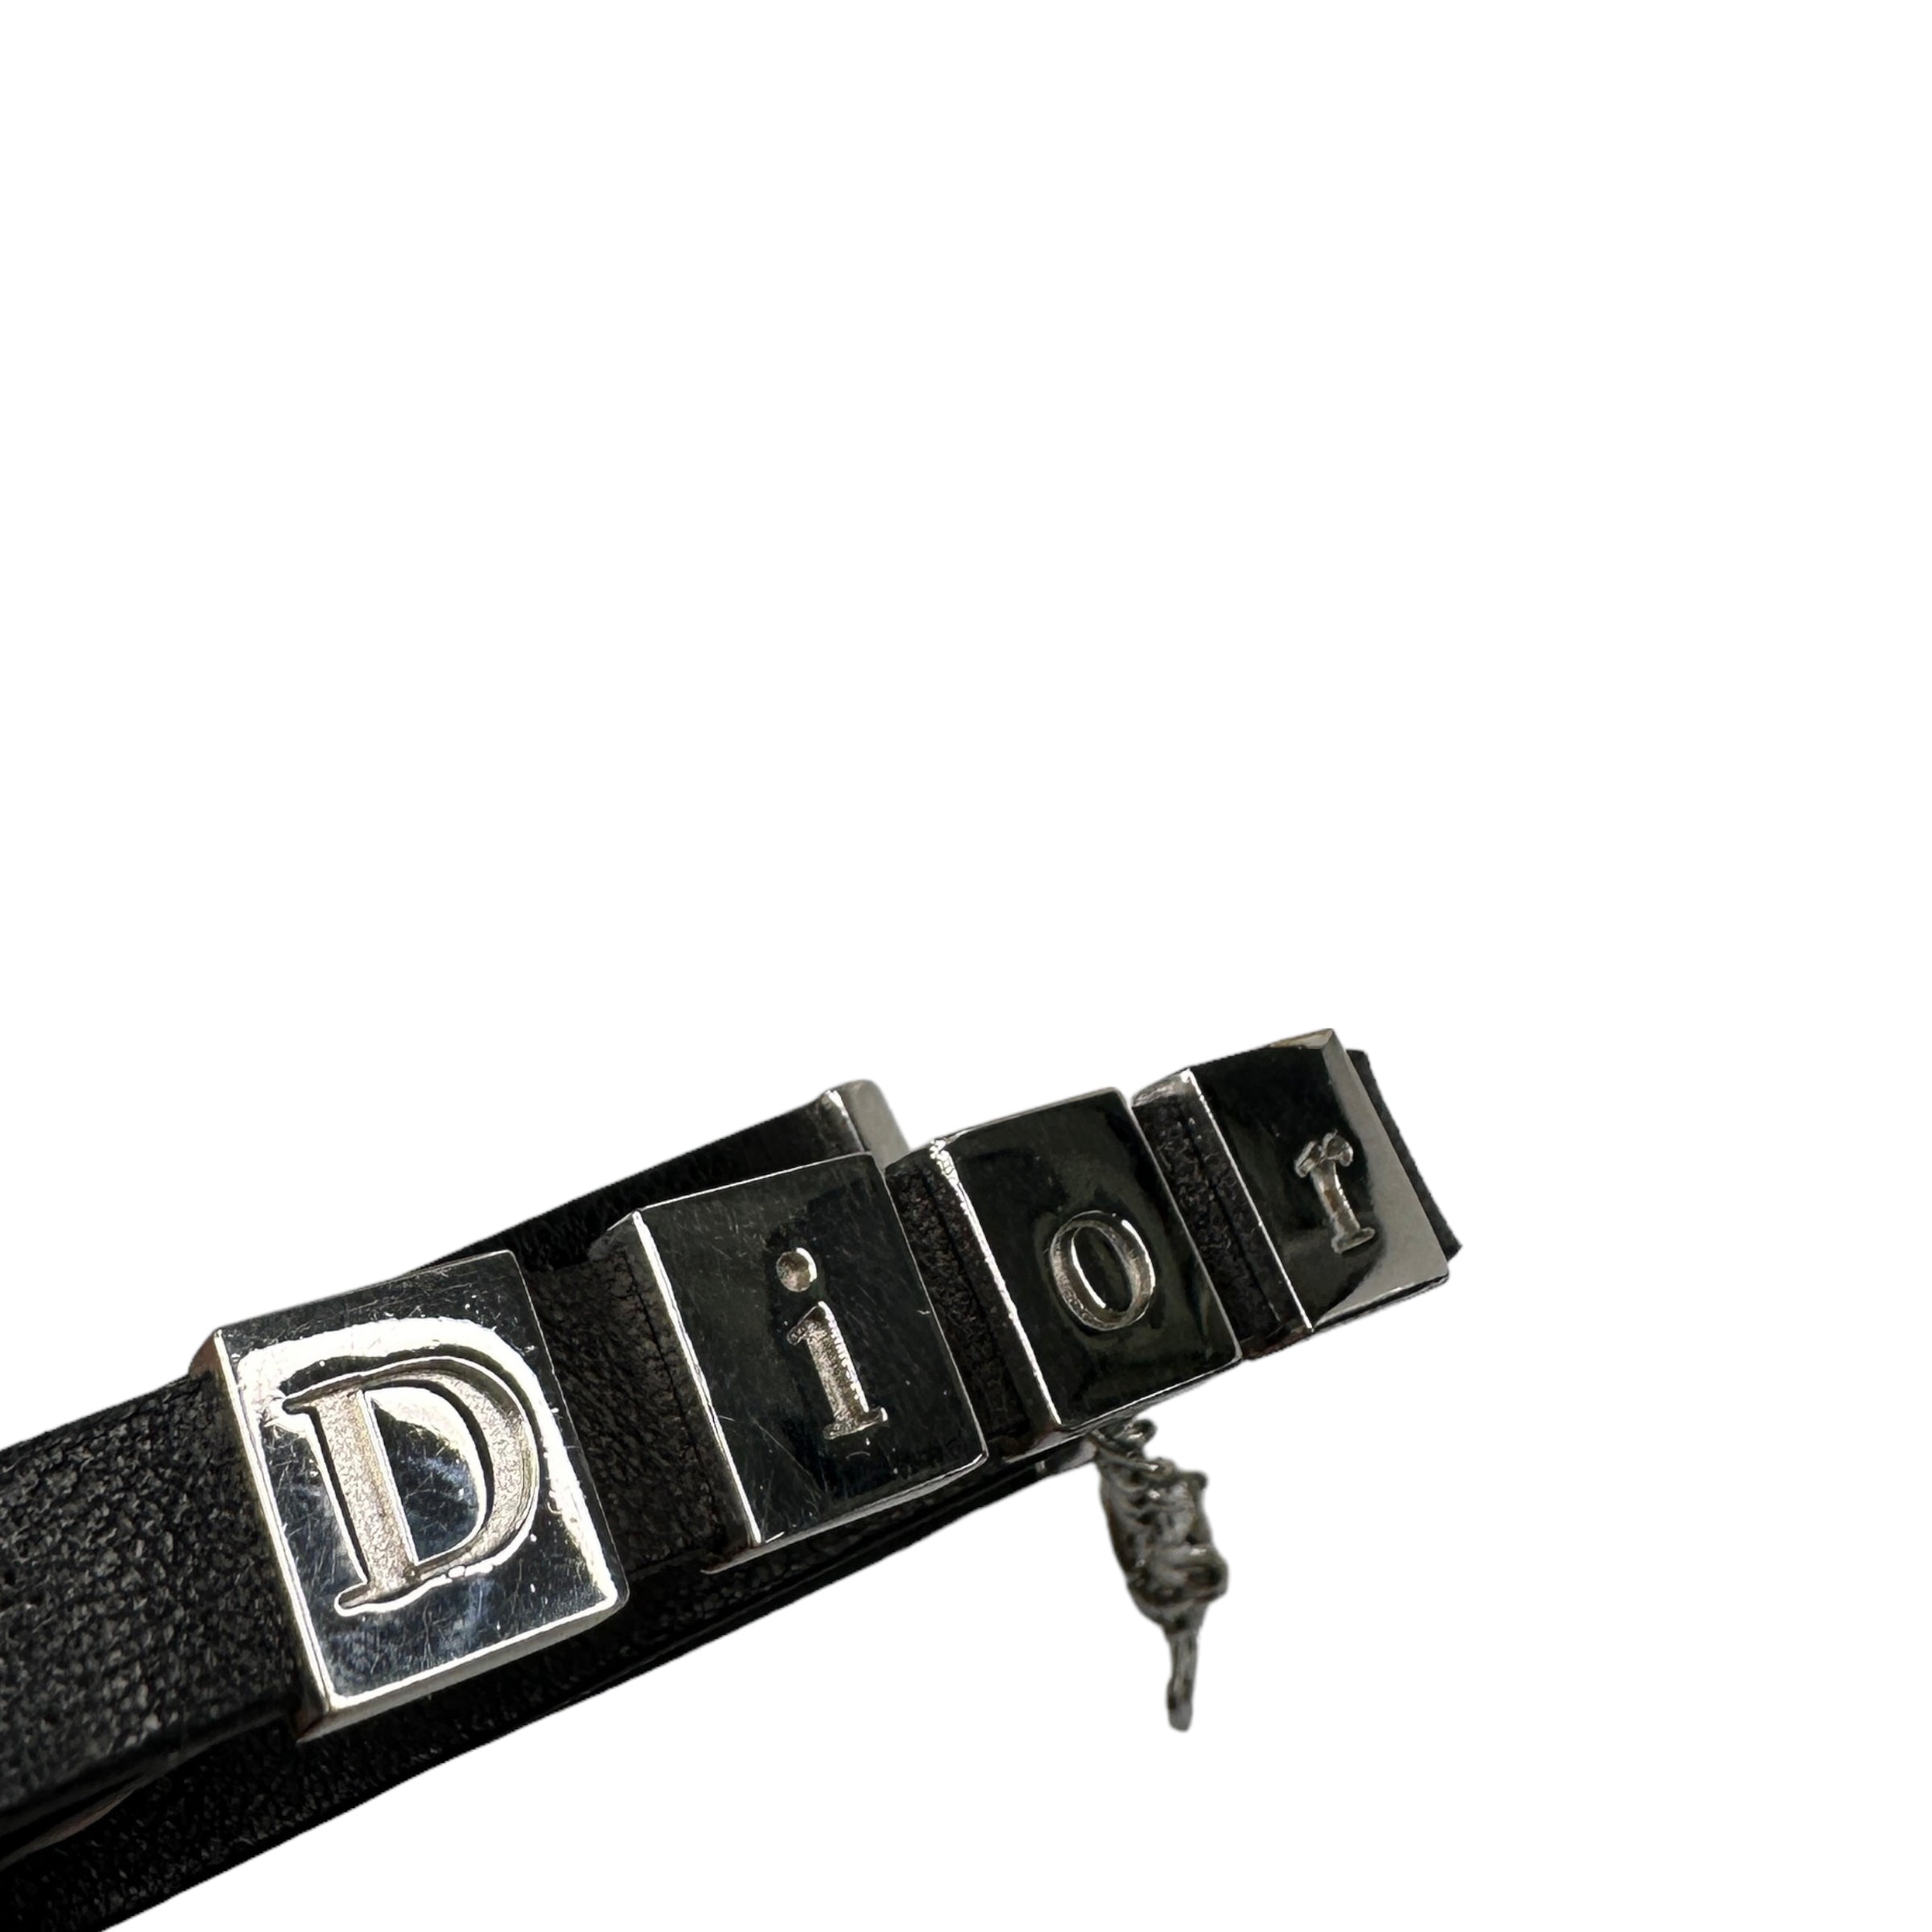 DIOR LEATHER & SPELLOUT CHARM CHOKER